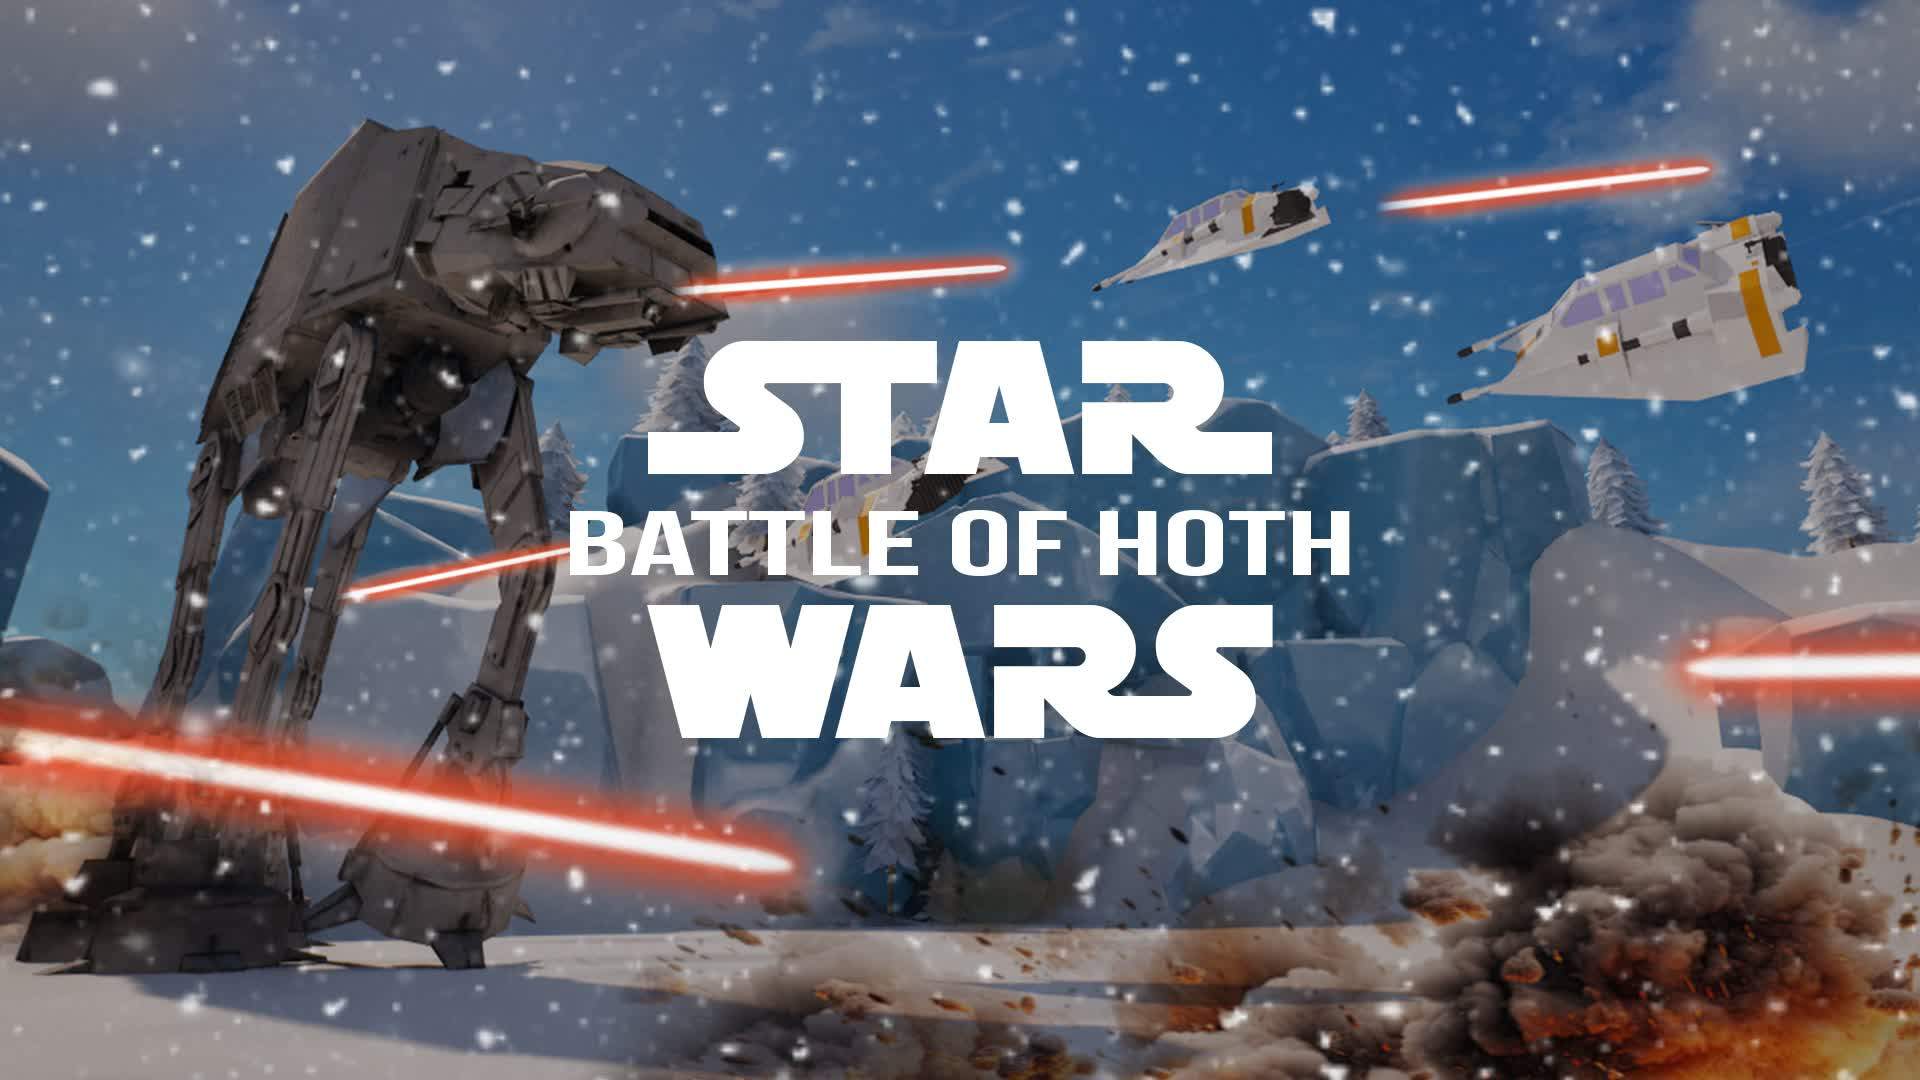 GALACTIC ASSAULT ON HOTH